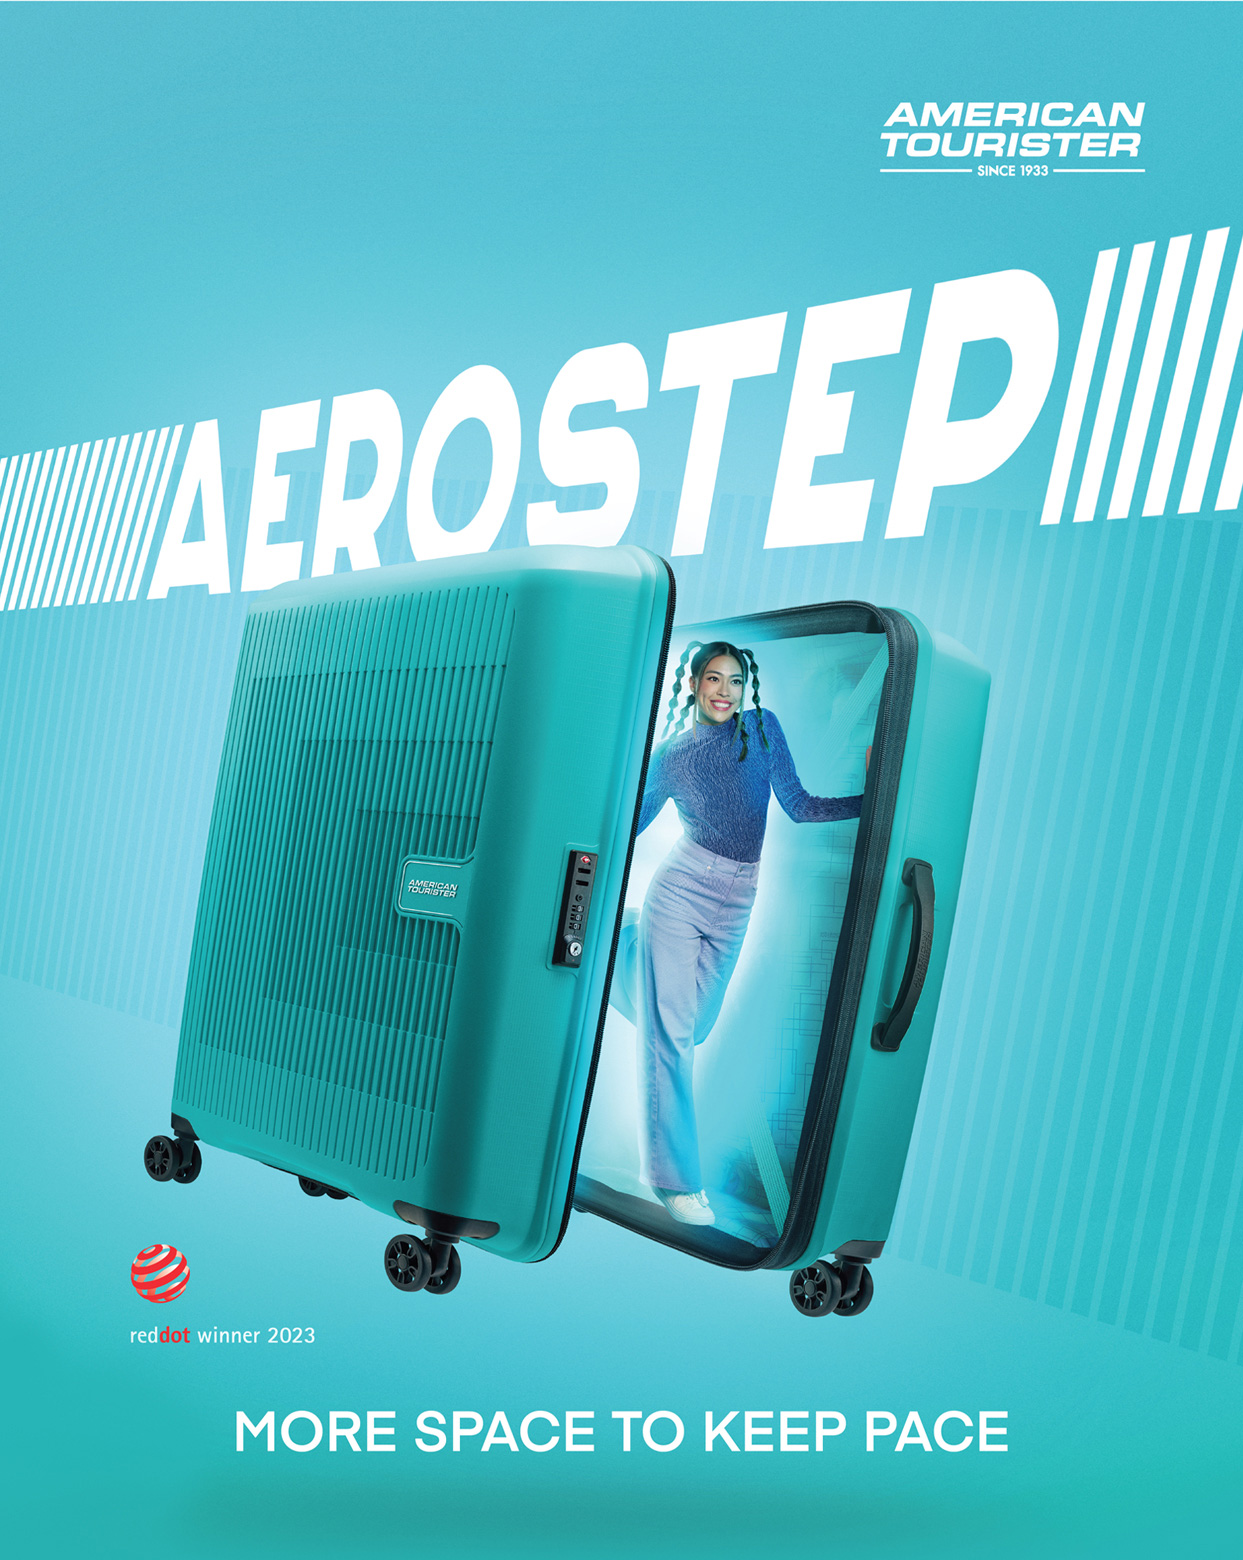 AMERICAN TOURISTER AEROSTEP reddot winner 2023 MORE SPACE TO KEEP PACE